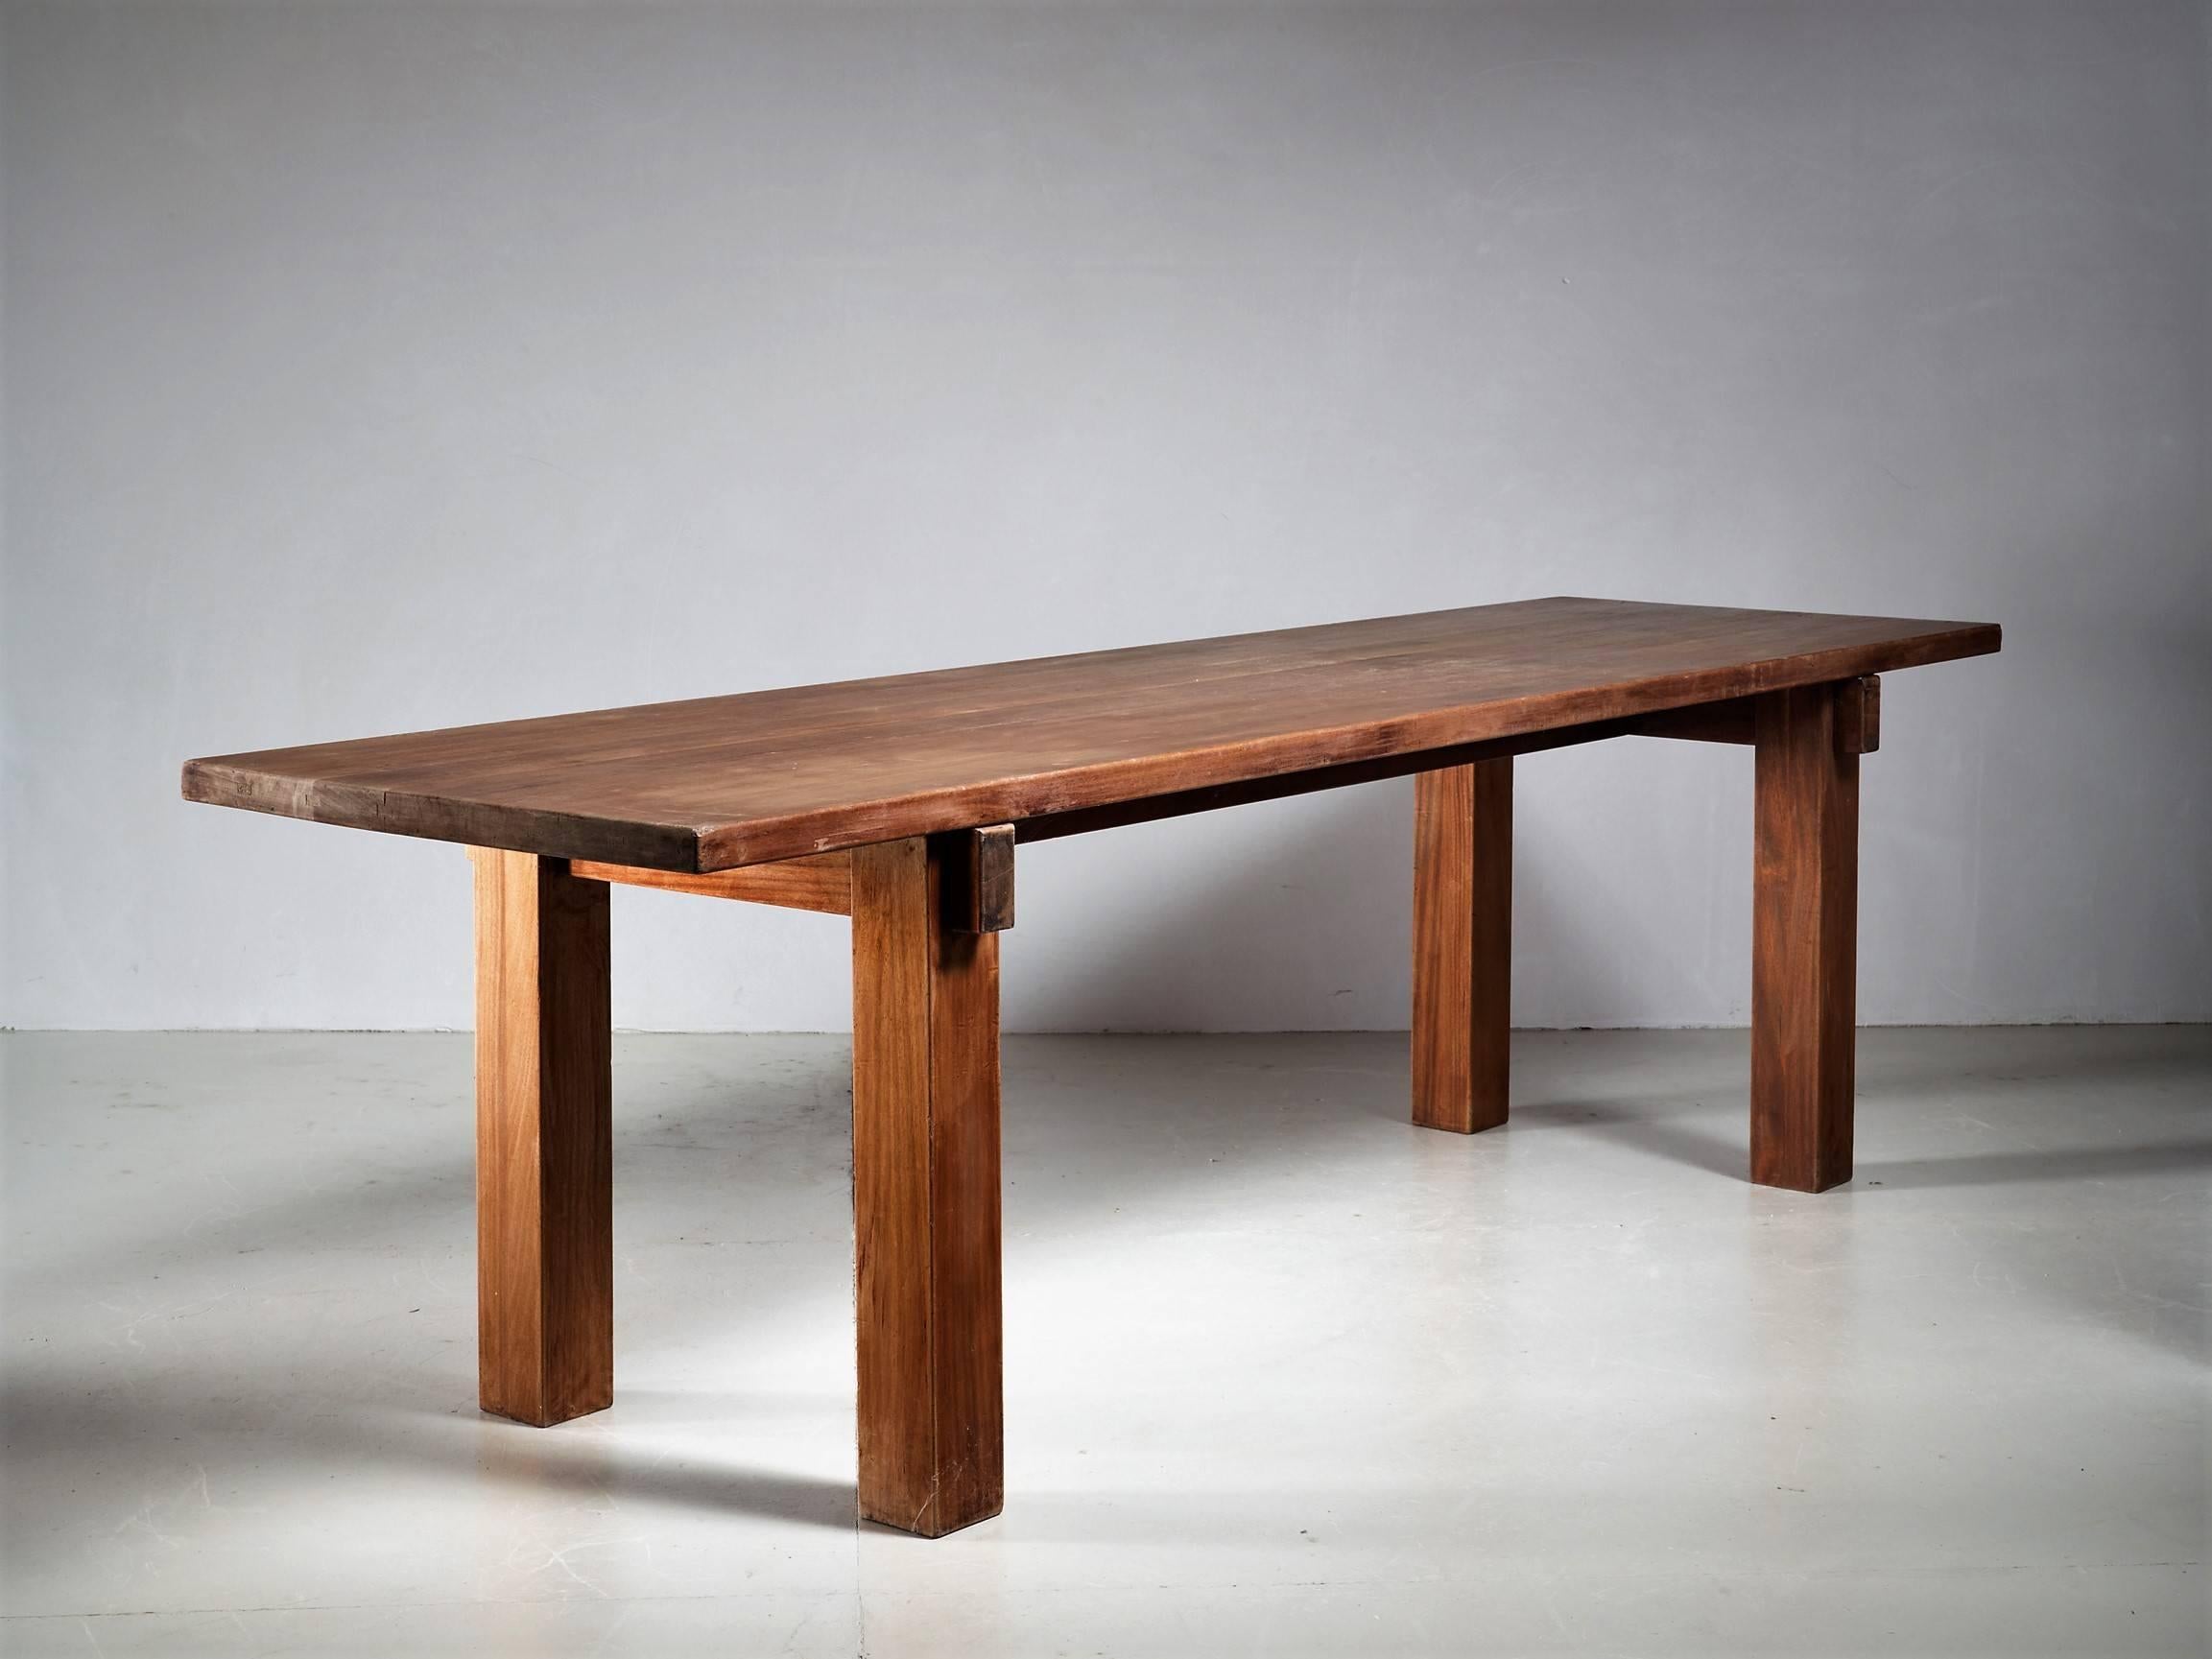 A stunning 'Brazil' table by Charlotte Perriand in a beautiful dark teak. Charlotte Perriand originally designed and used this table herself as a console table in her apartment in Rio de Janeiro. It has the great Perriand combination of solid wood